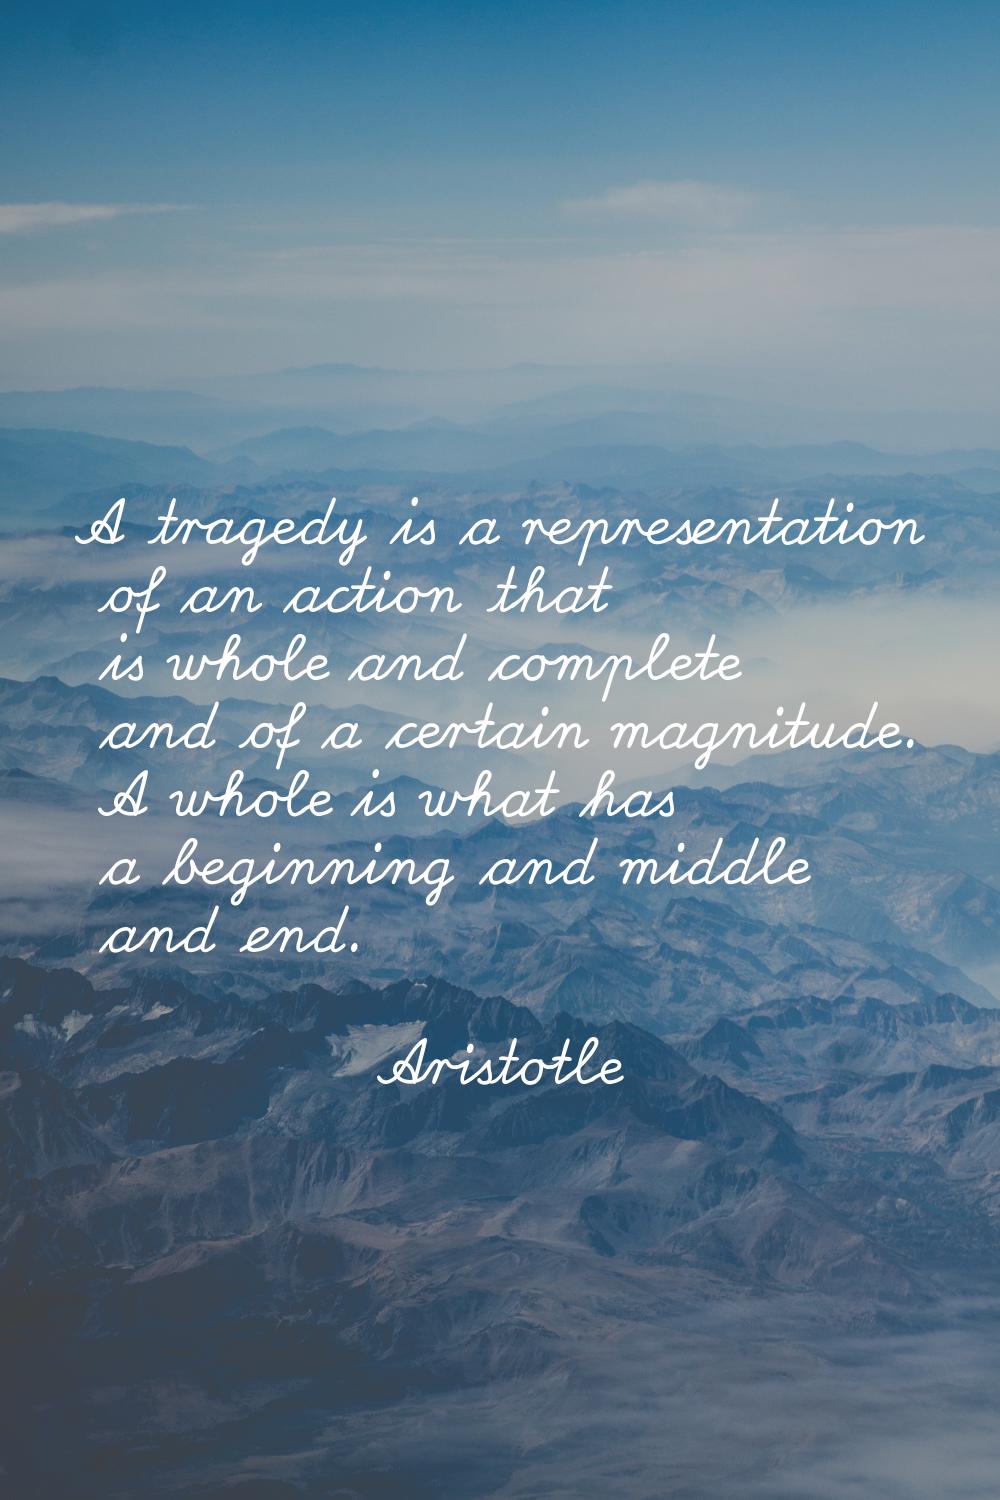 A tragedy is a representation of an action that is whole and complete and of a certain magnitude. A